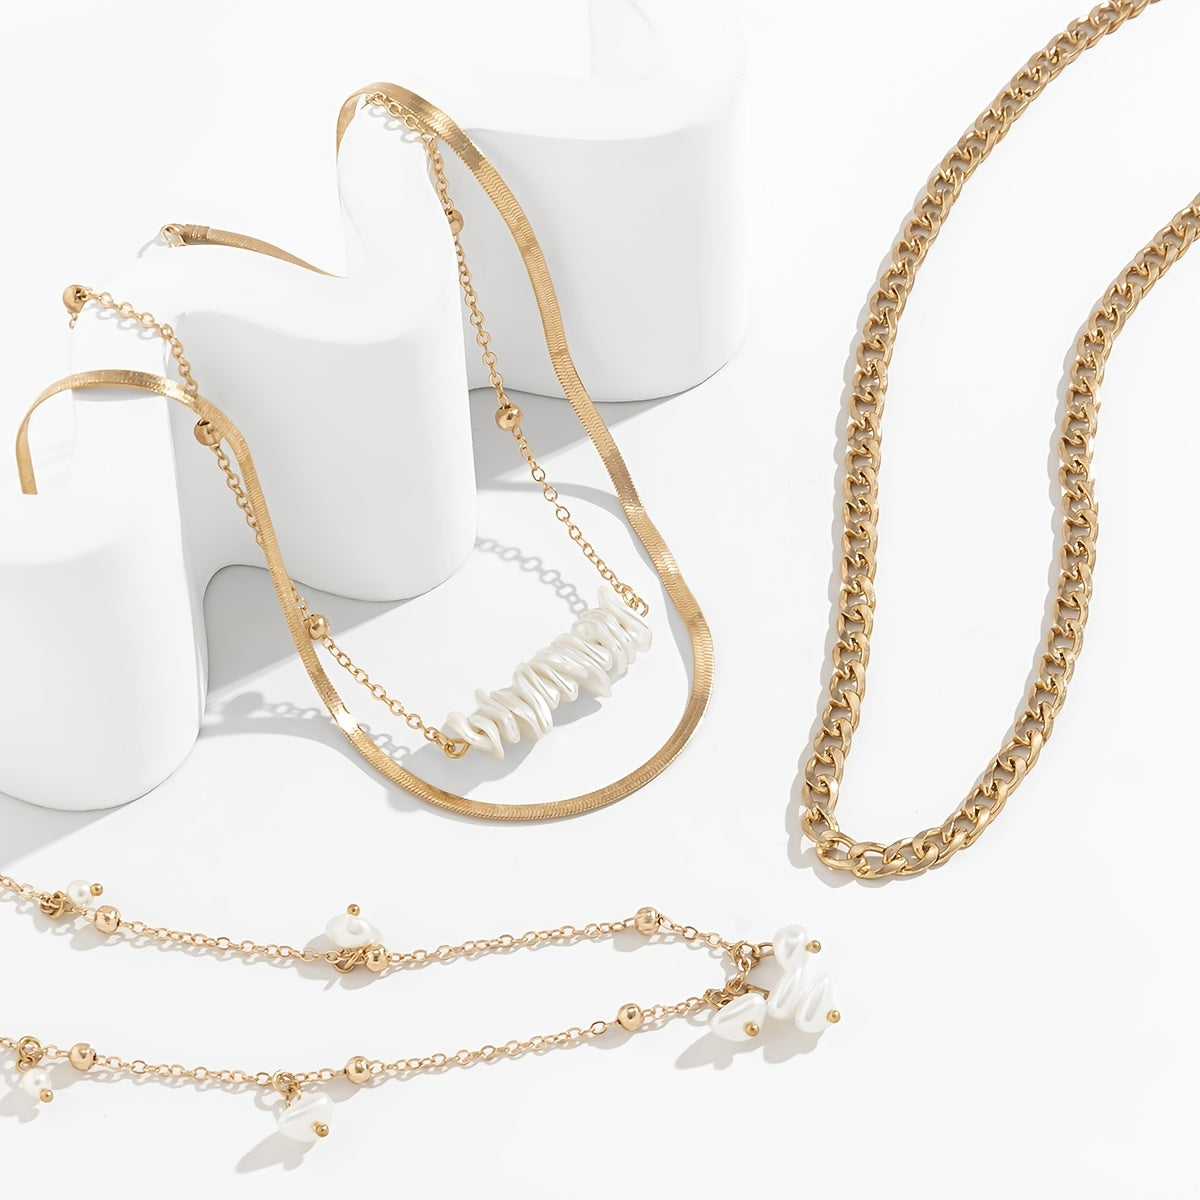 4-Piece Pearl Tassel Necklace Set: Add a Touch of Elegance to Your Look!